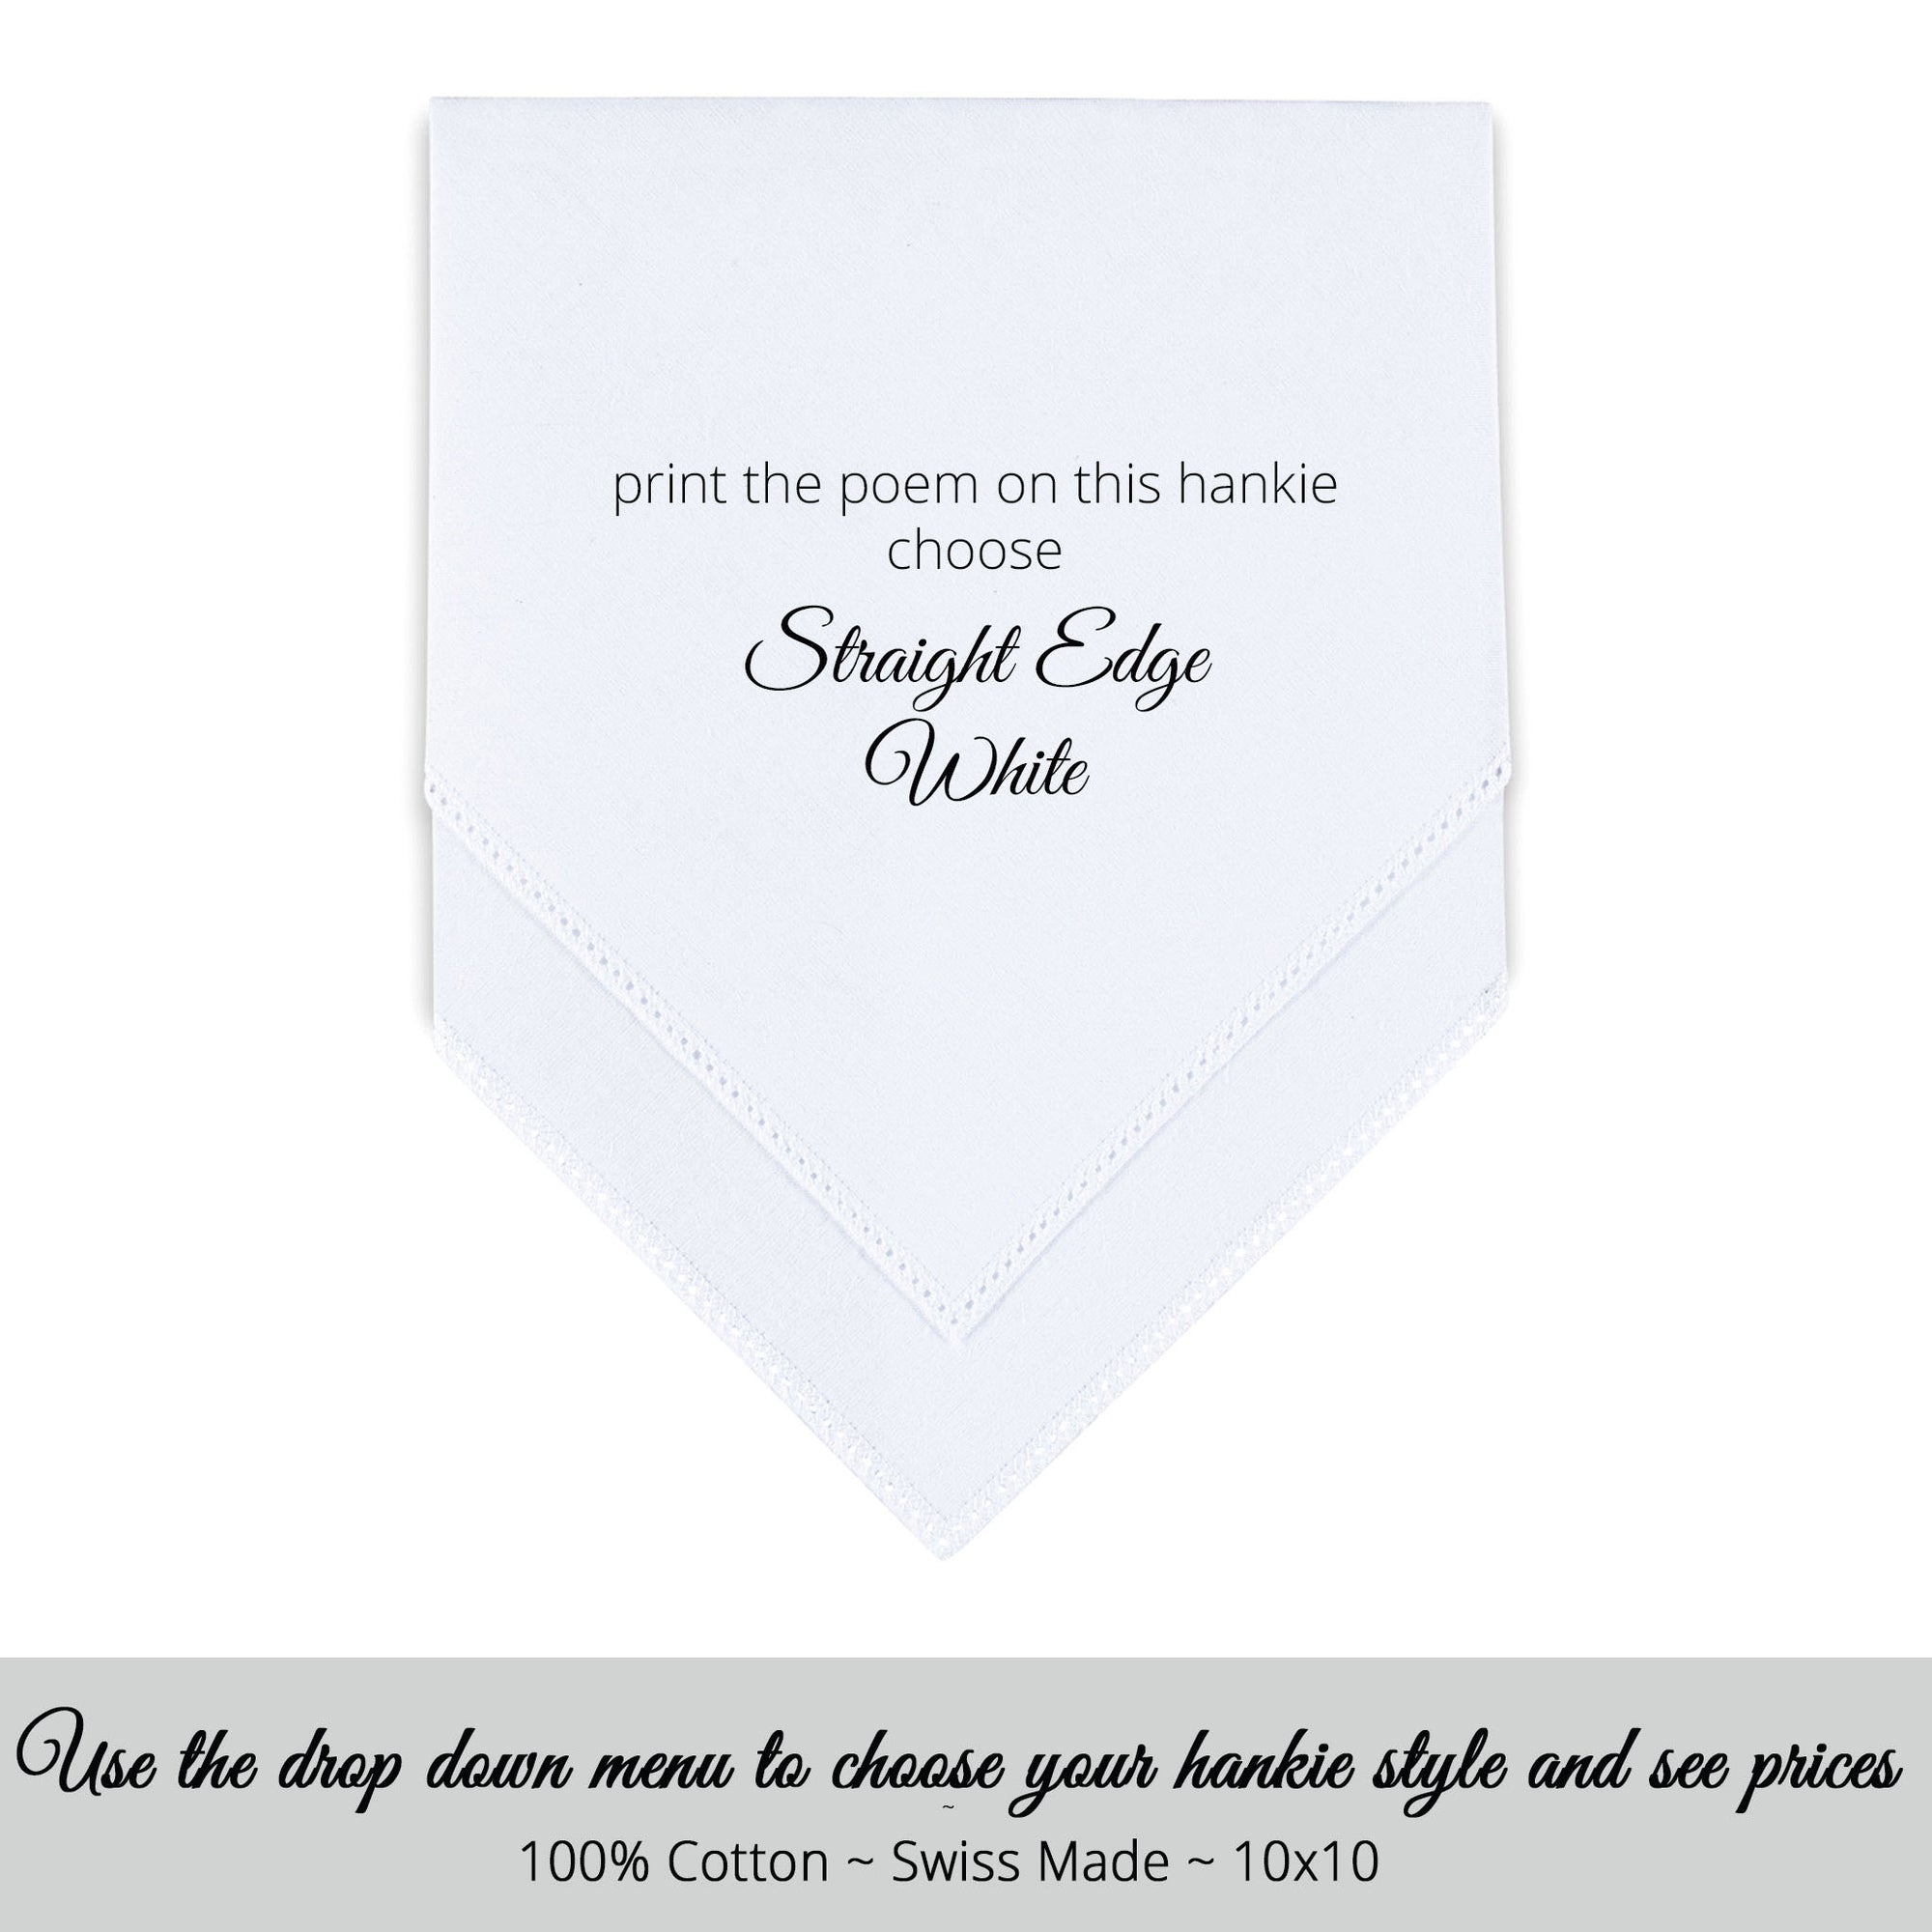 Straight edge white personalized wedding handkerchief with poem for mother of the bride